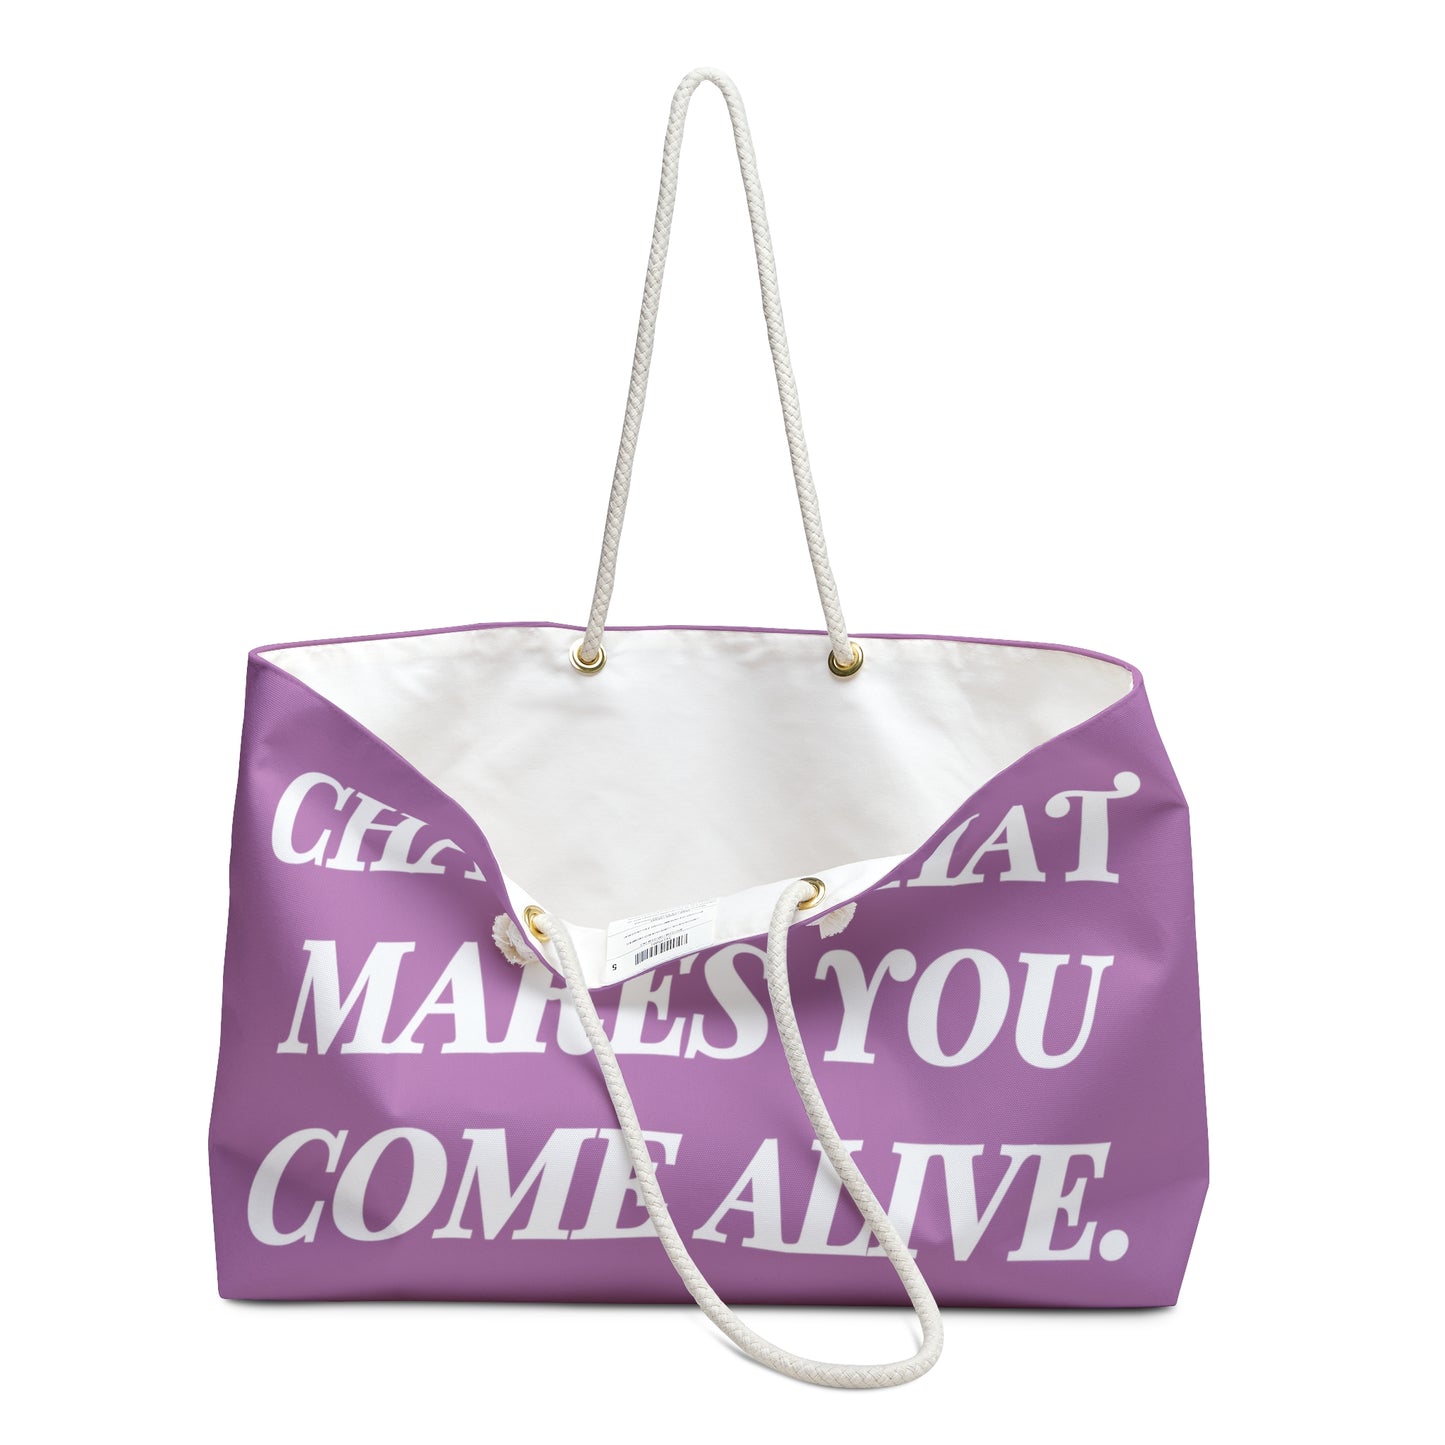 DH CHASE Weekender Bag (White//Lilac)